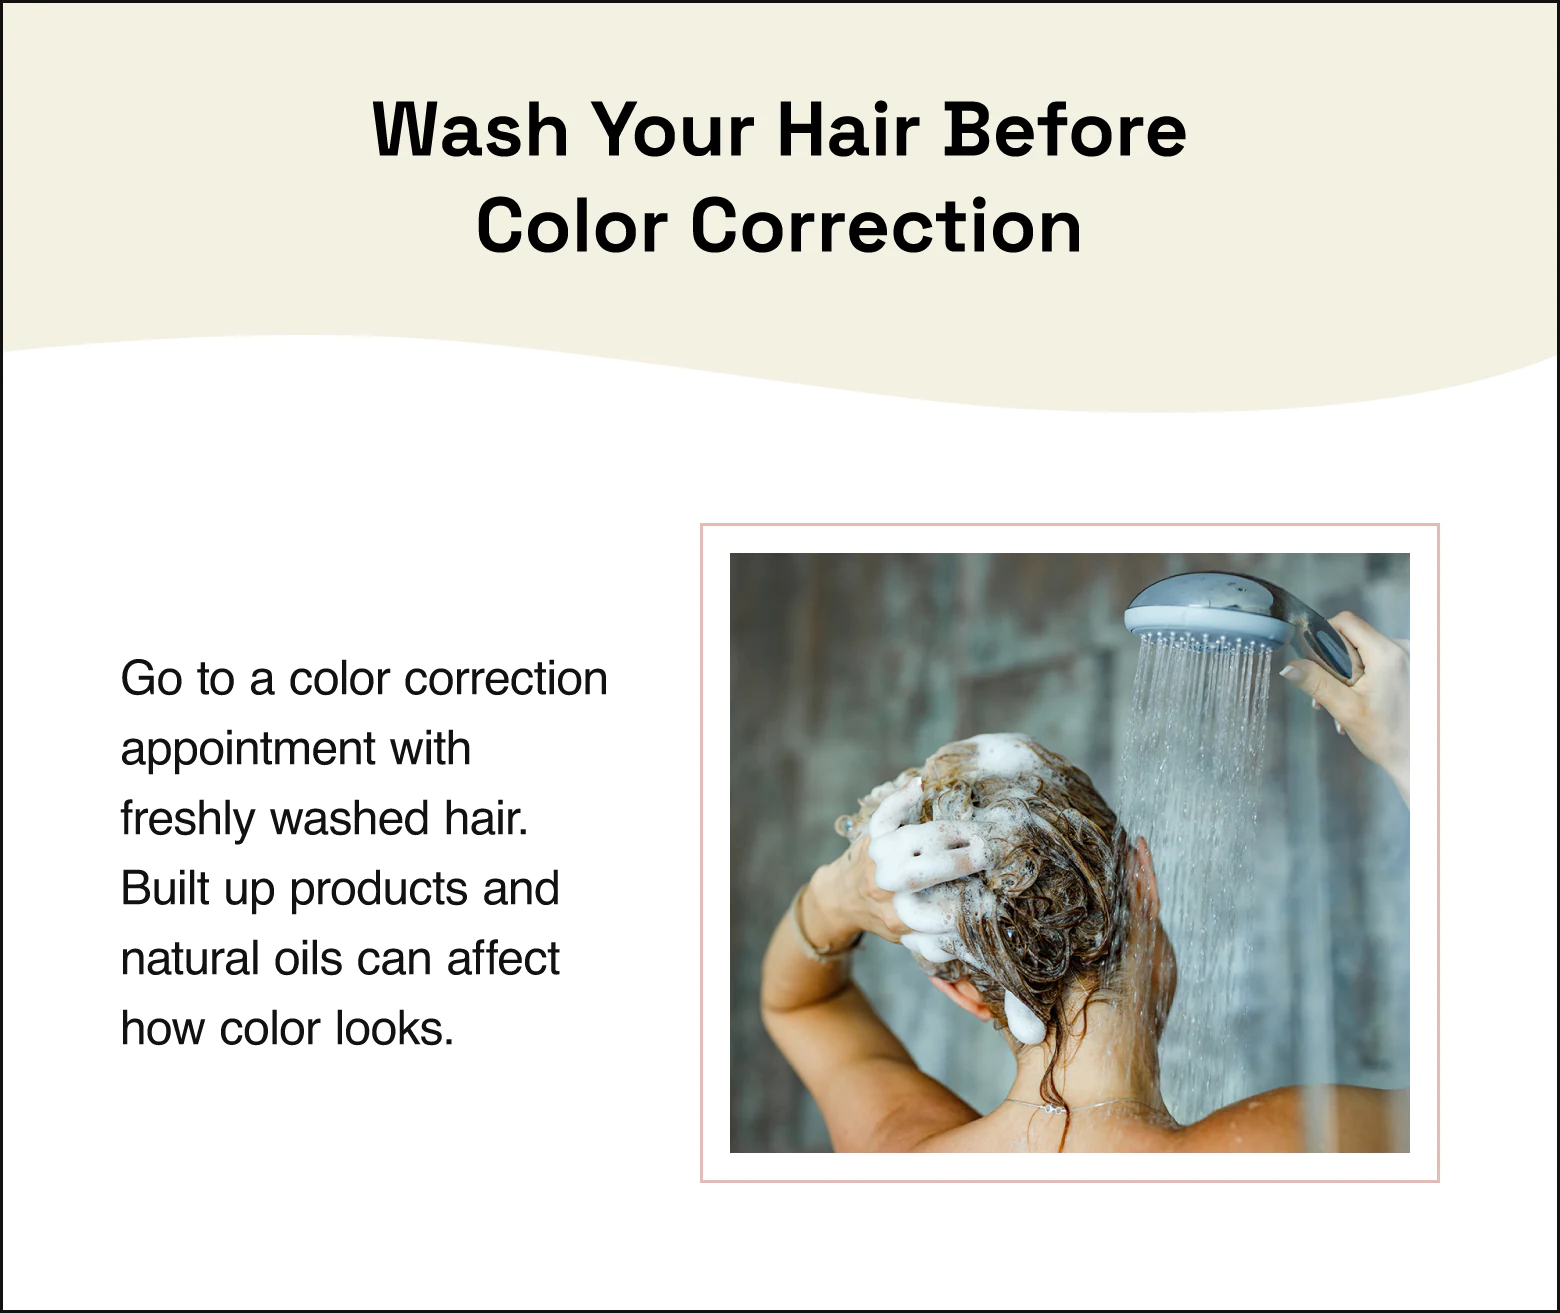 Tip for washing your hair before a color correction appointment.